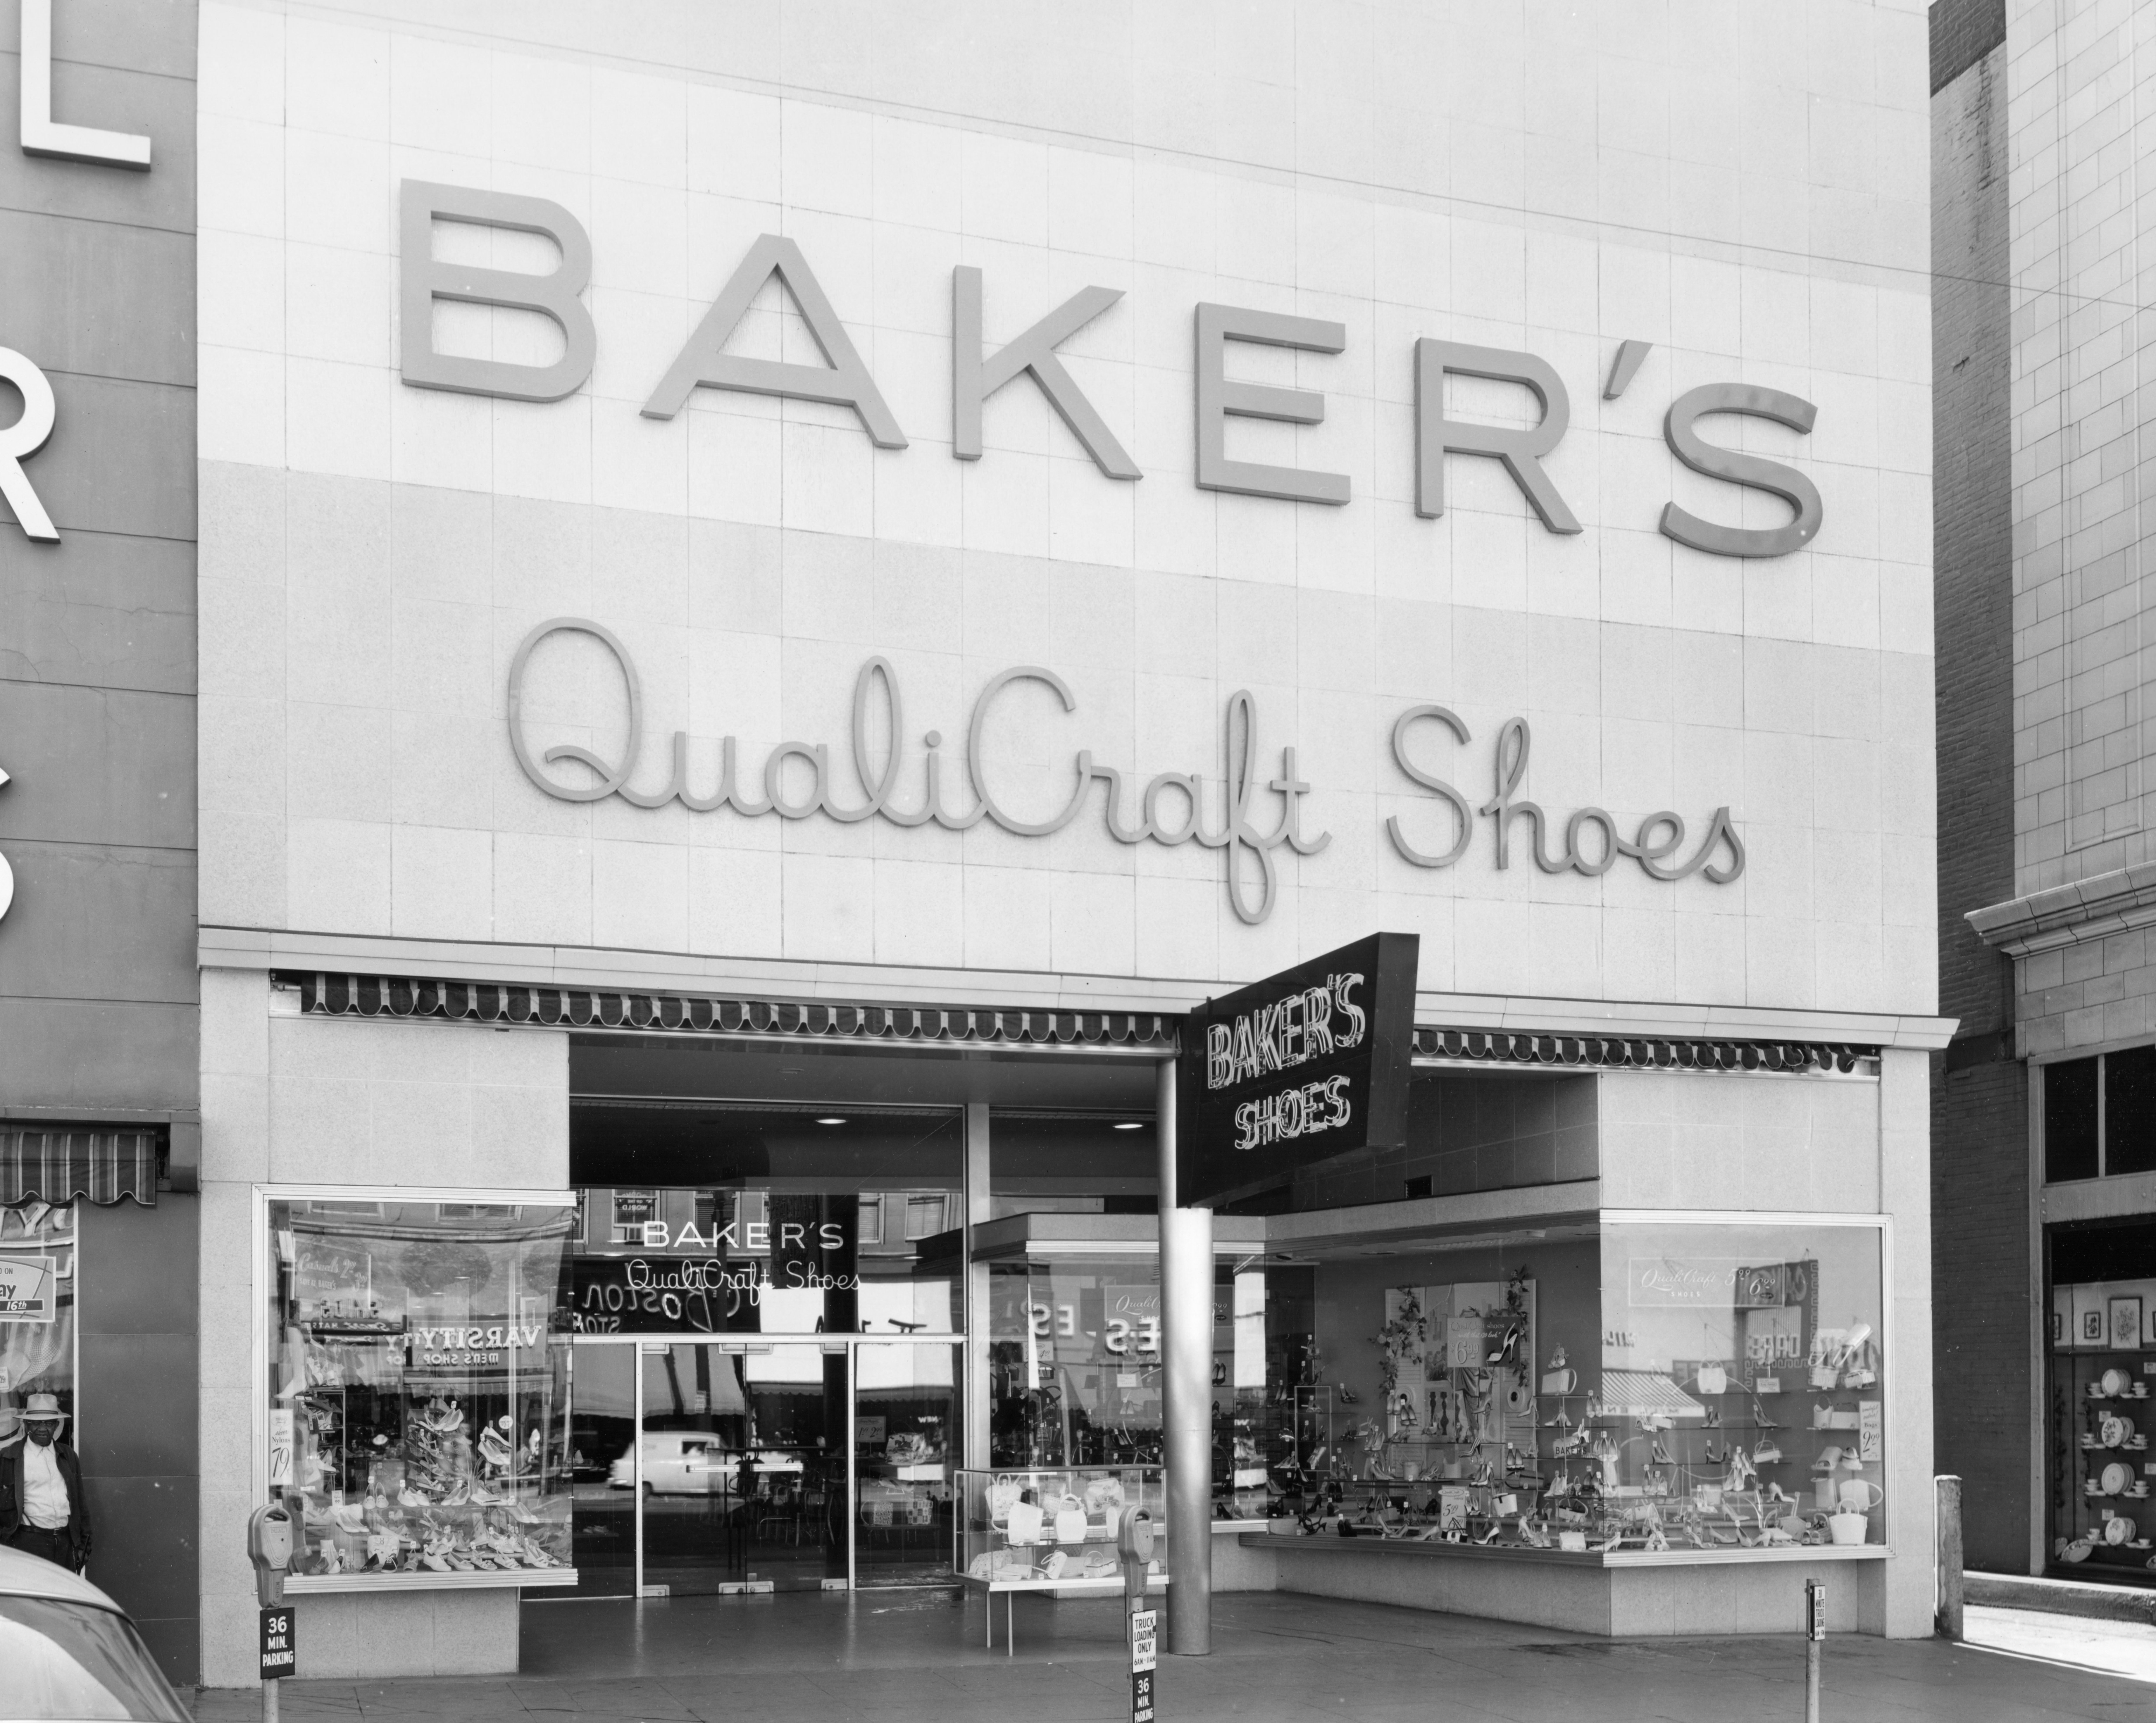 Bakers Shoe Store P.1 | Department of 